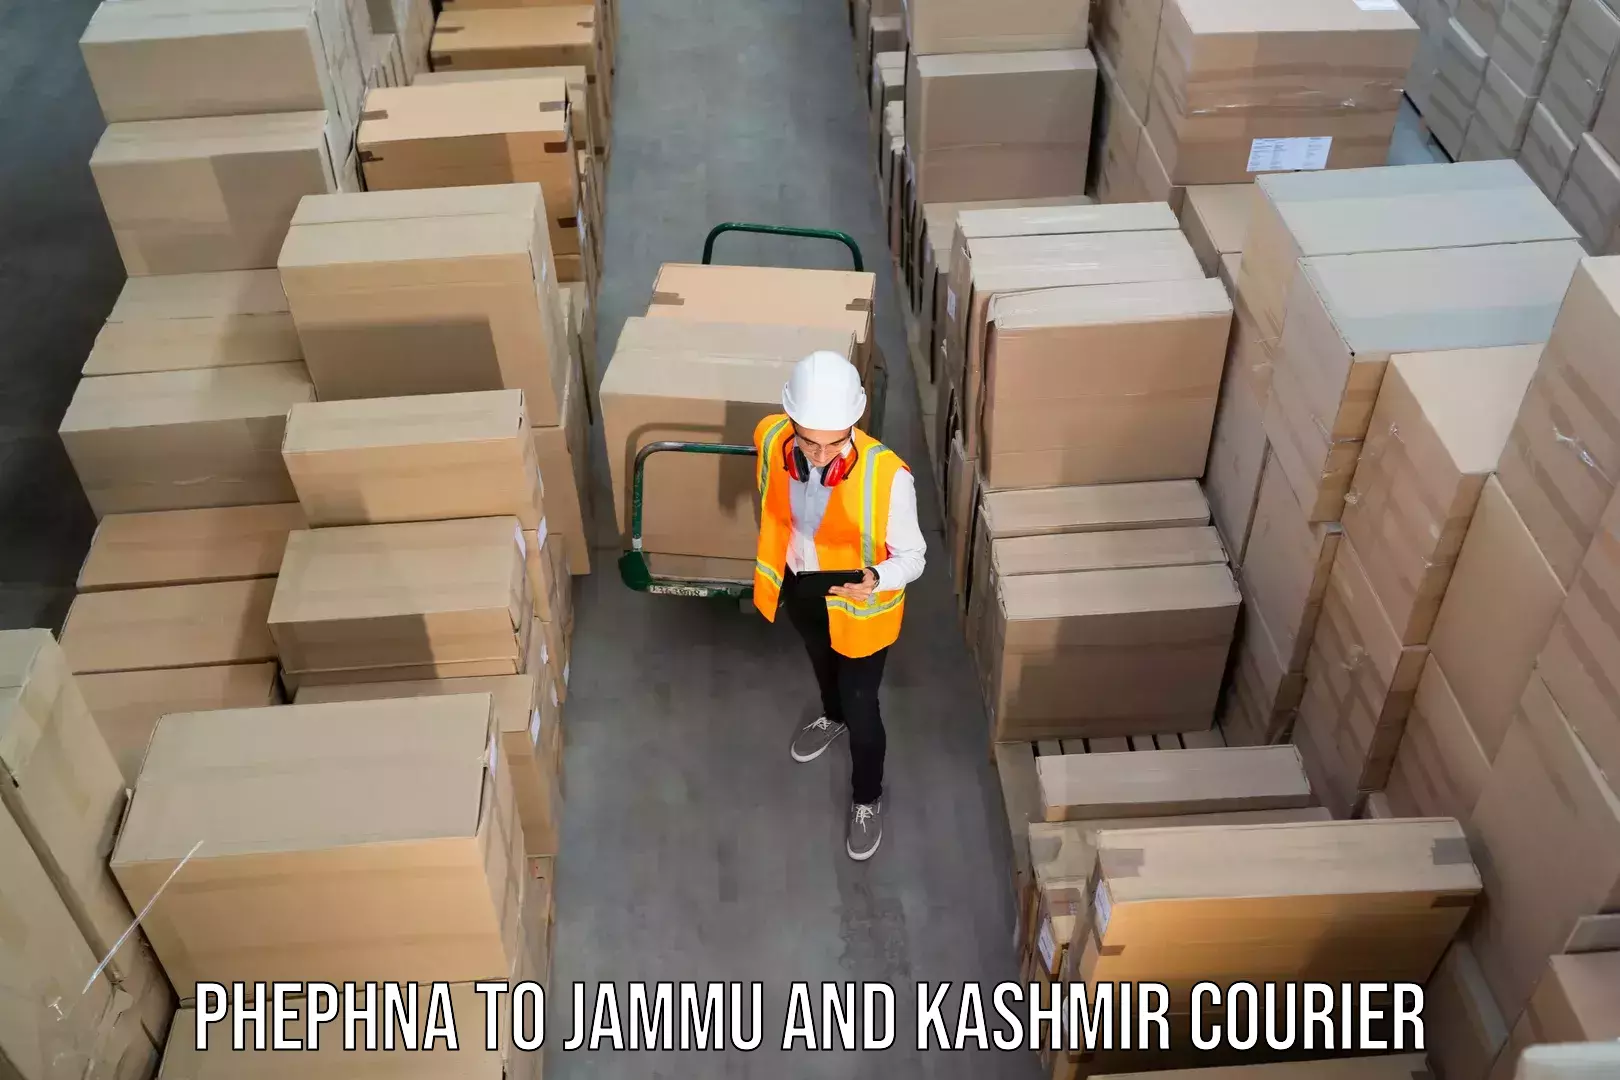 Round-the-clock parcel delivery Phephna to Jakh